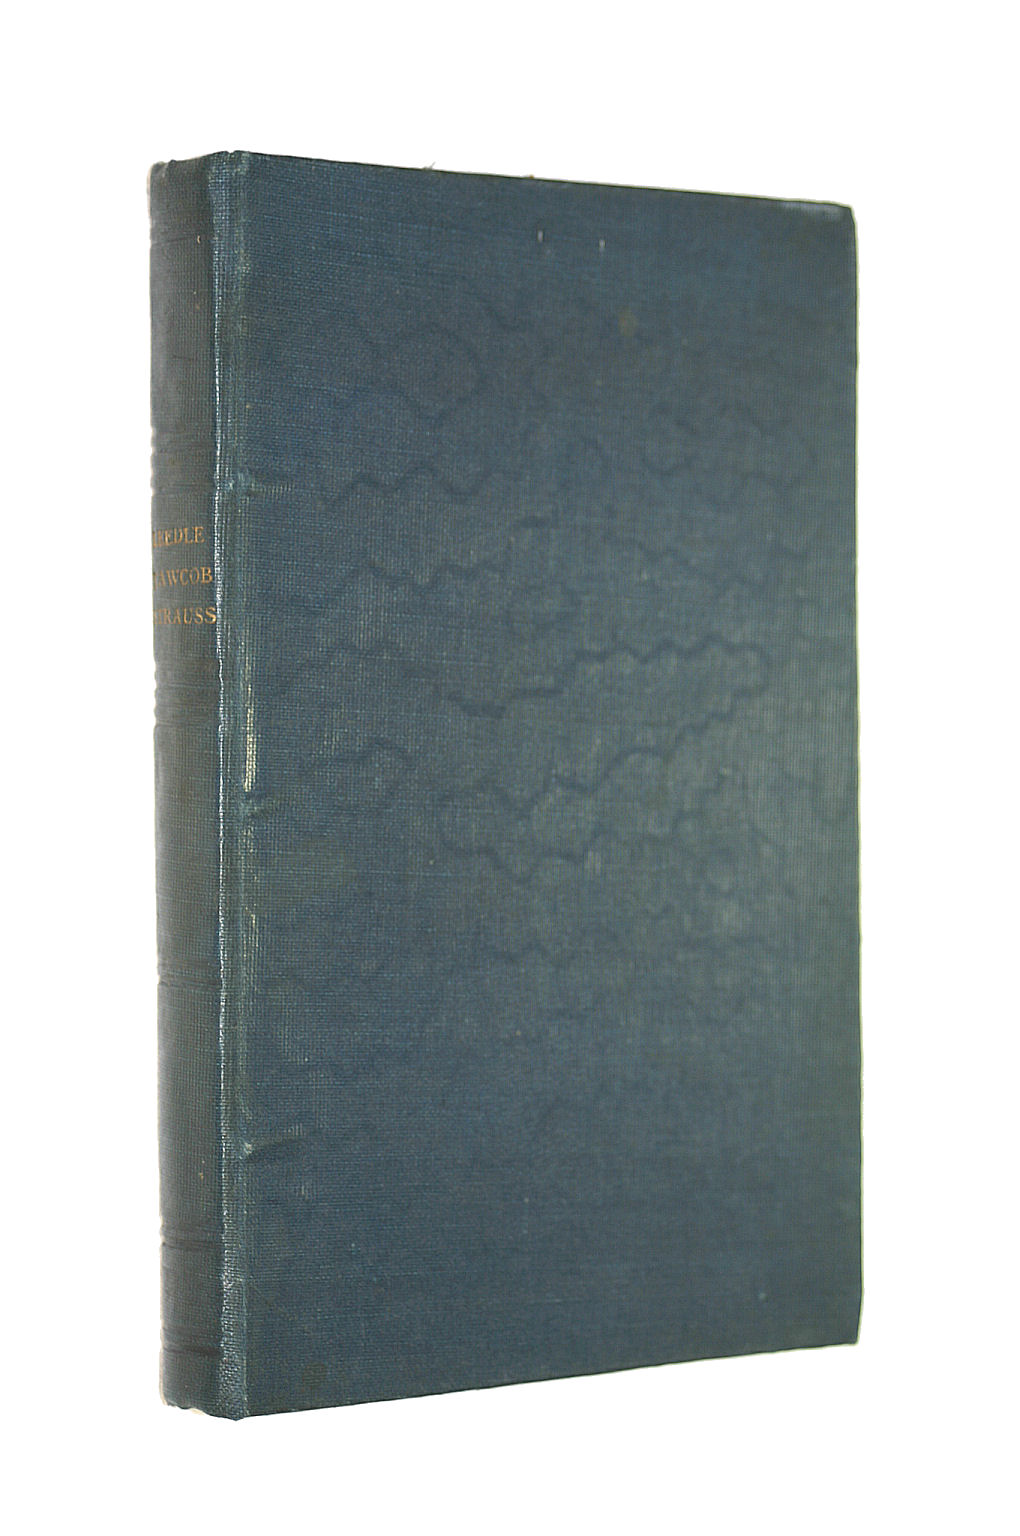 CHARLES FOLLEN ADAMS - Leedle Yawcob Strauss, and other poems